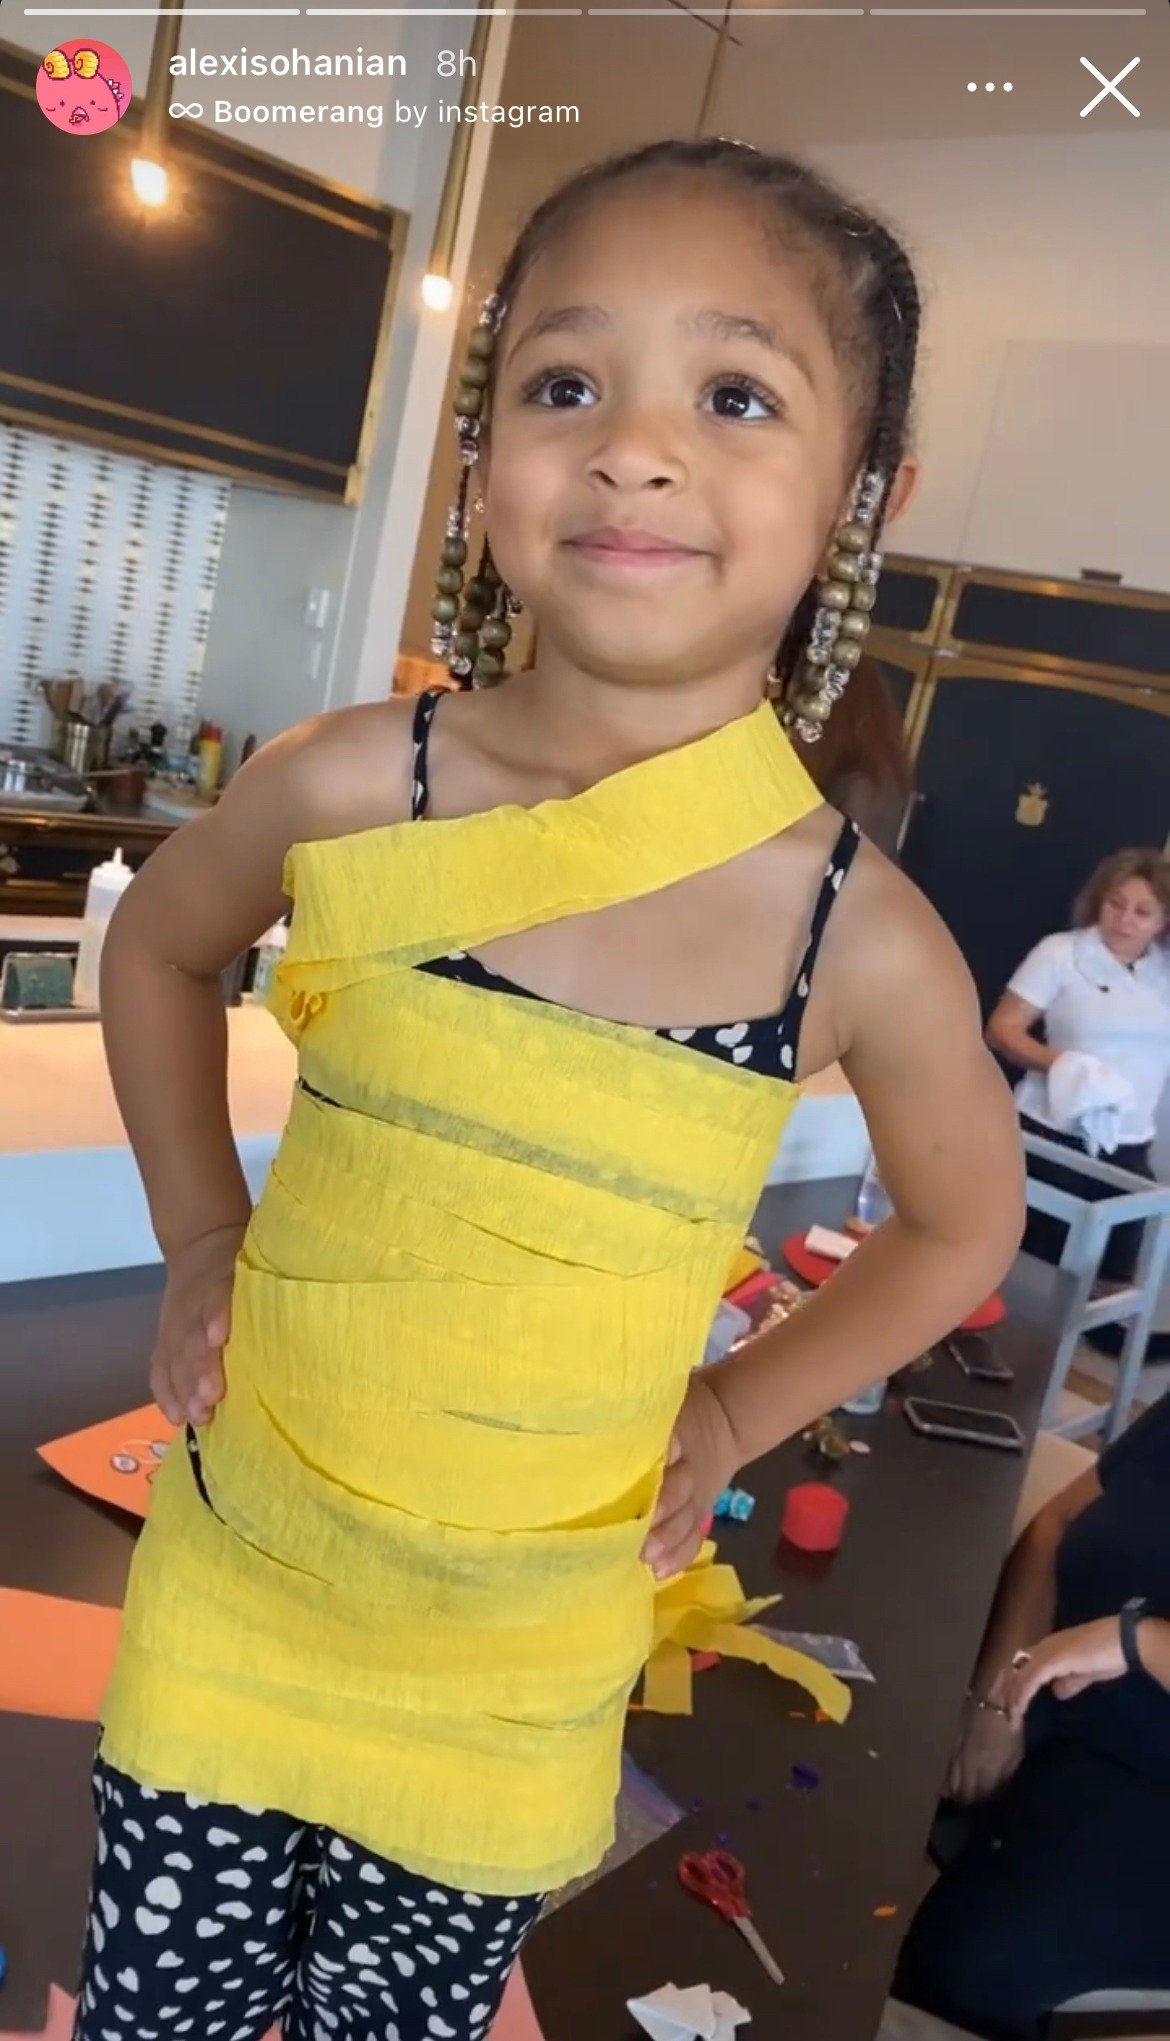 Serena Williams's daughter Olympia wrapped in yellow paper while wearing her black dress. | Photo: Instagram/Alexisohanian